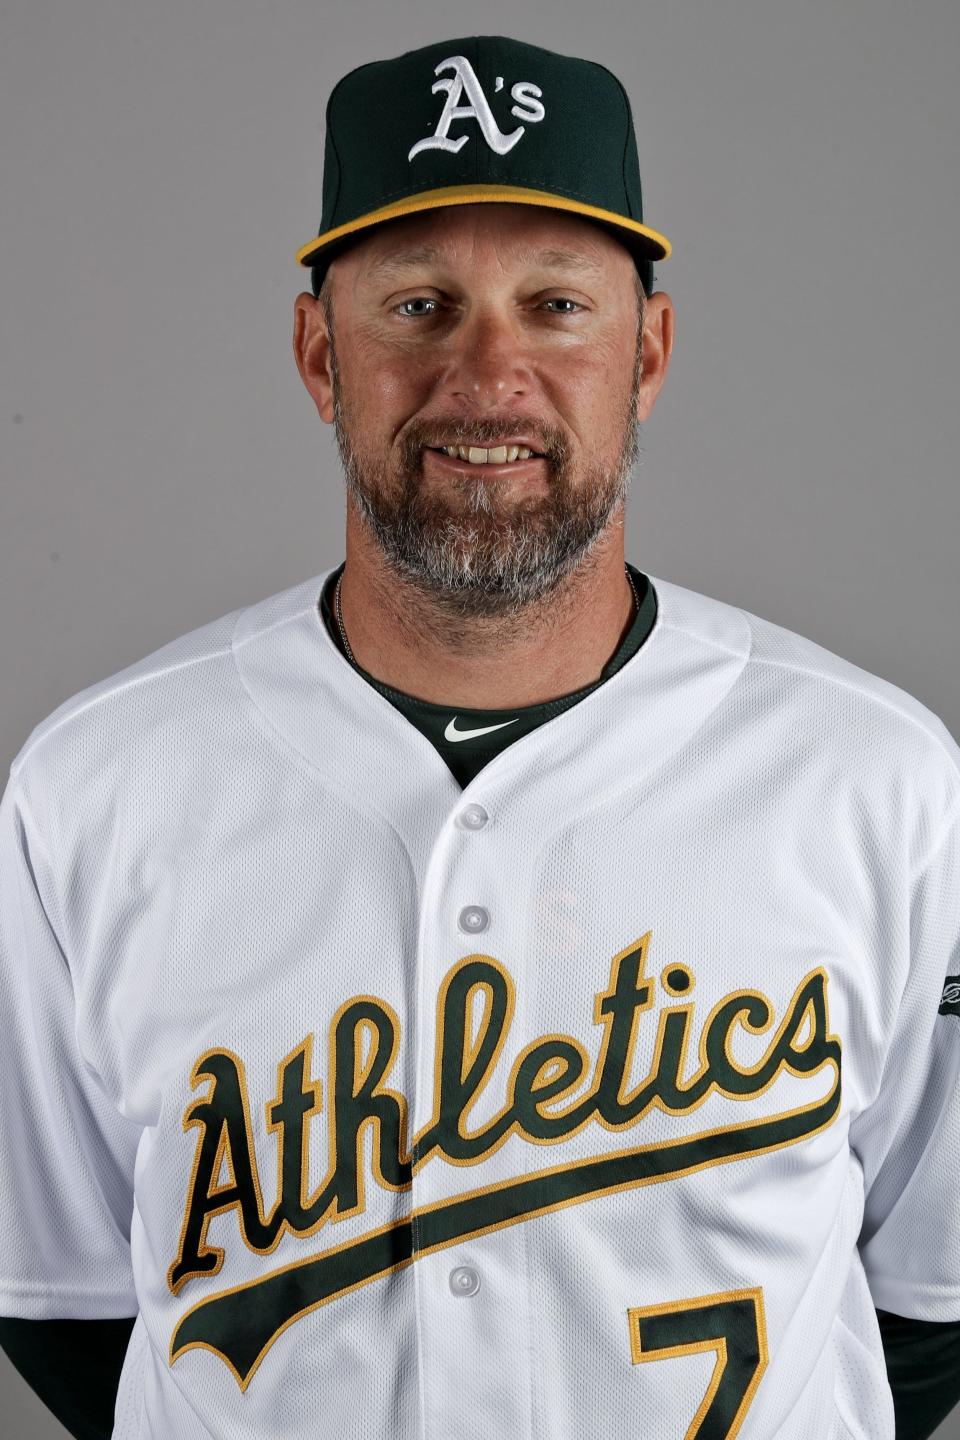 Former Boston Red Sox outfielder Mark Kotsay, who is currently the quality control coach for the Oakland Athletics, could be a candidate for the position of Red Sox manager after the Red Sox fired Ron Roenicke on Sunday.